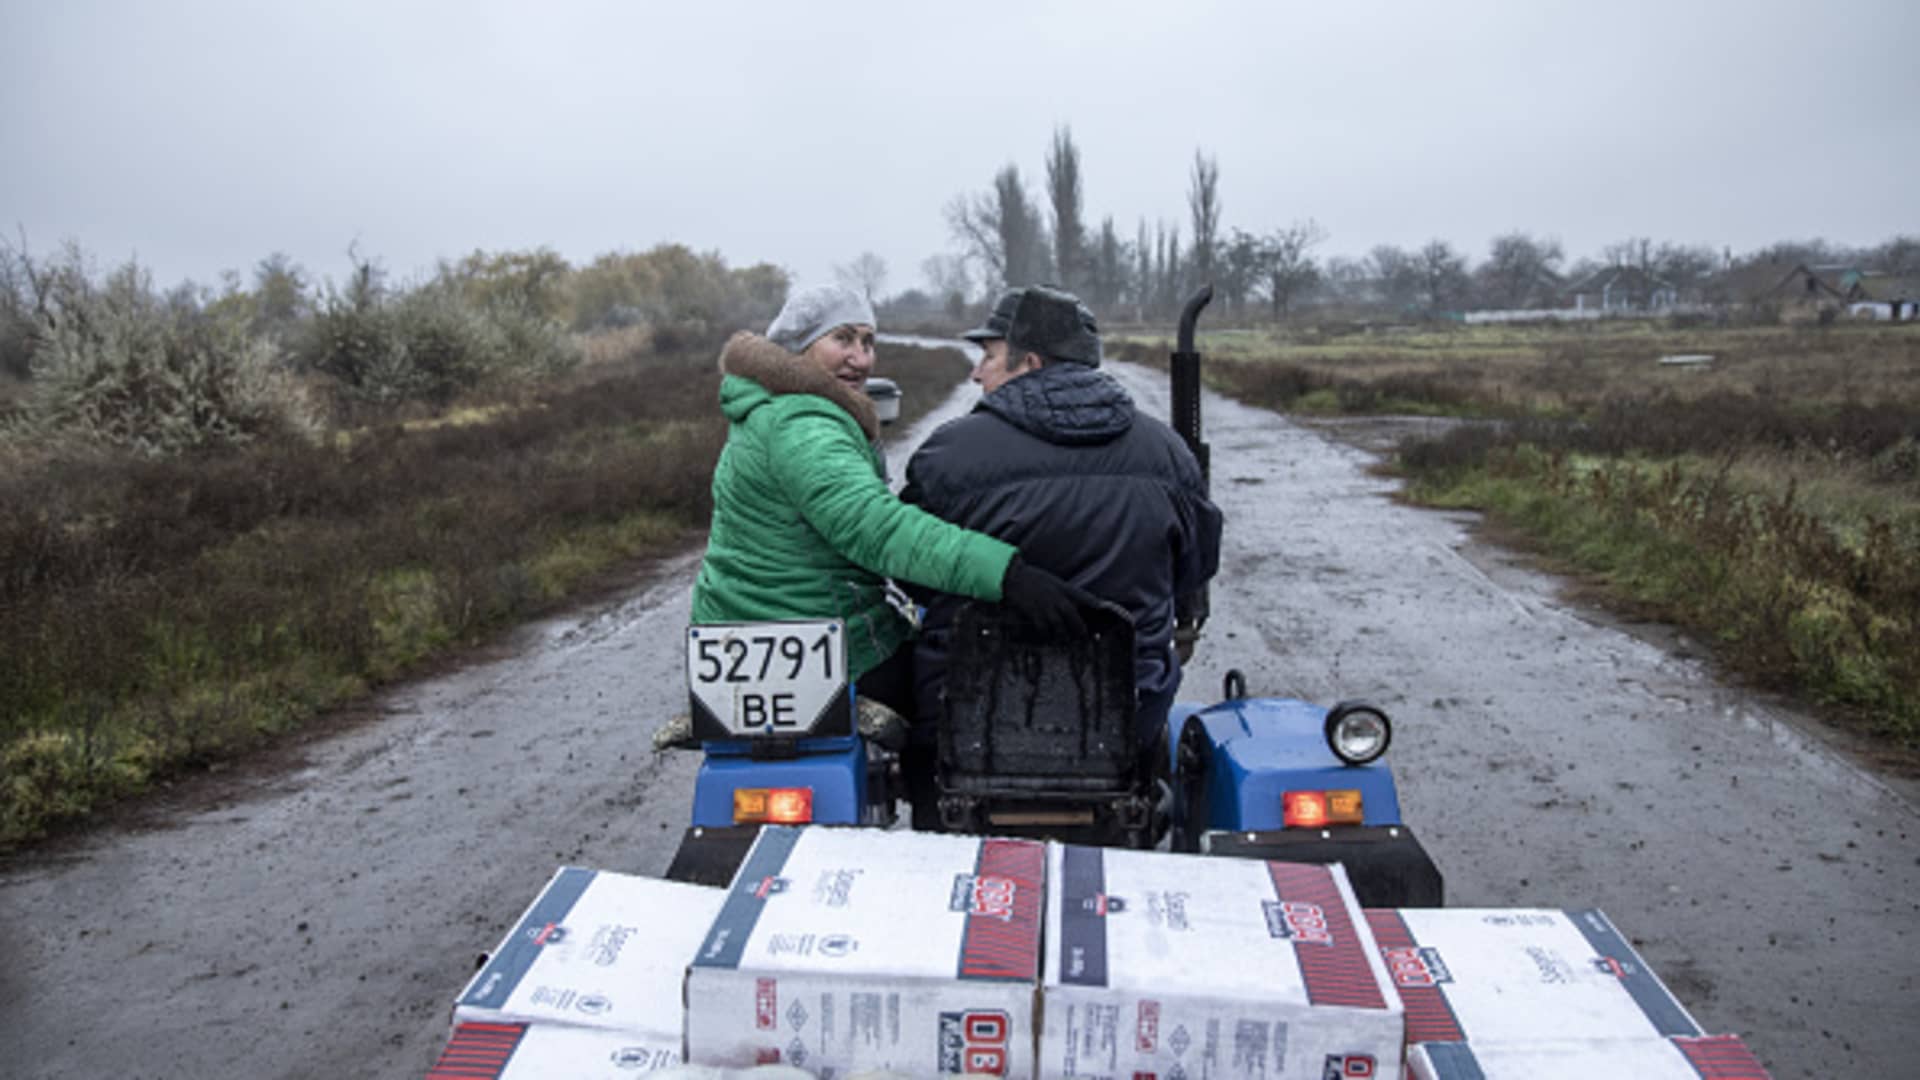 Locals transfer humanitarian aid supplies near Novopetrivka, following the withdrawal of Russian troops from Kherson region, Ukraine, on Nov. 17, 2022.